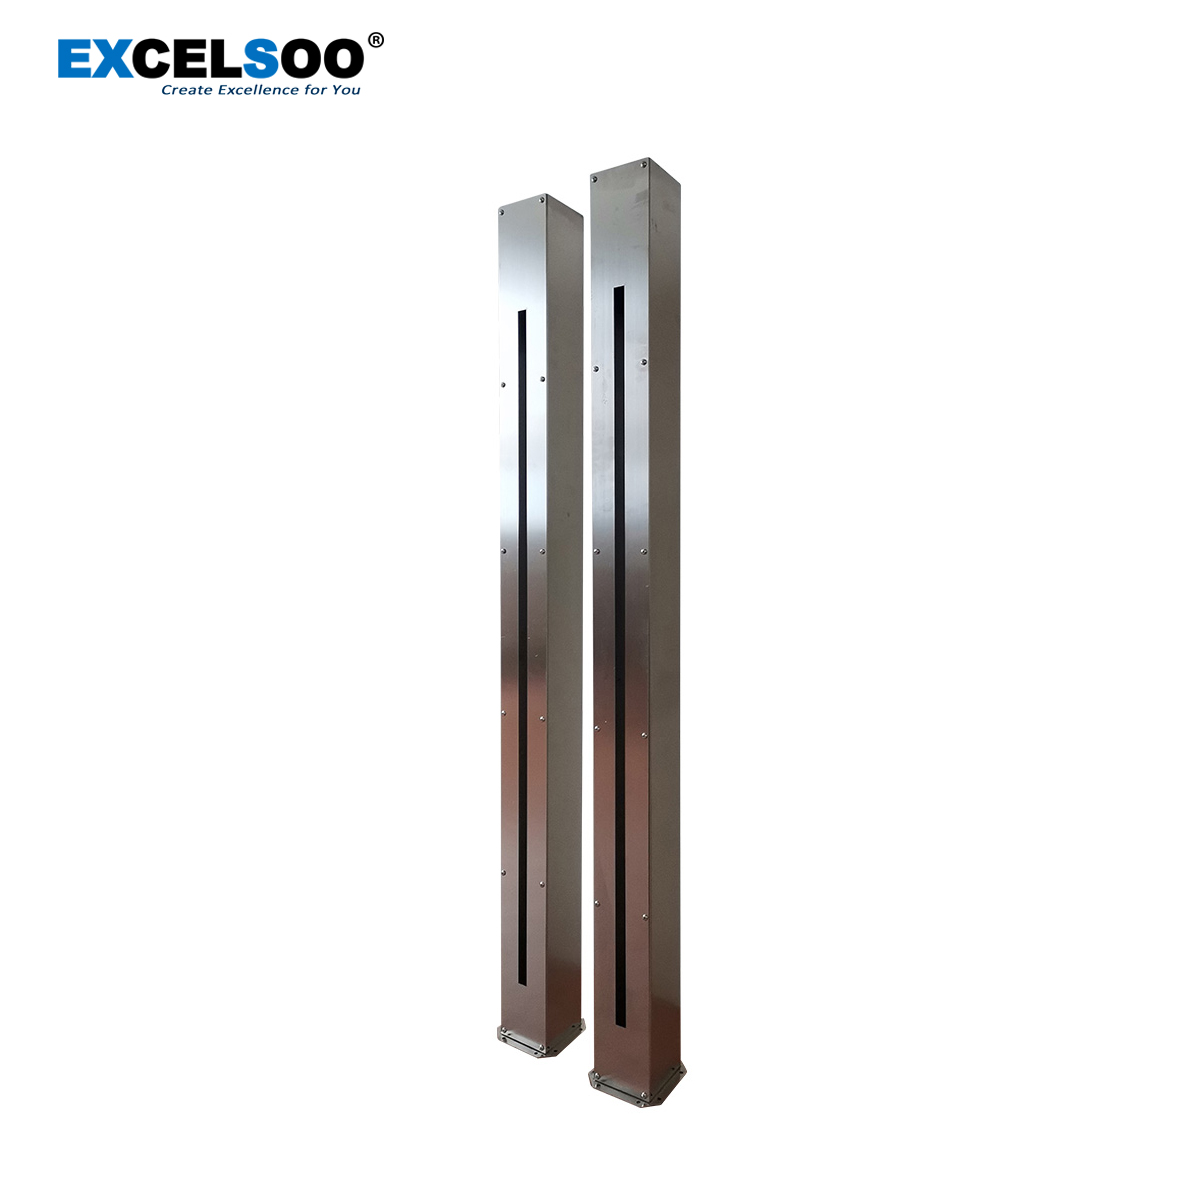 Excelsoo EX-ABX Series Infrared Barriers Beam Sensor Stainless Steel Protective Box